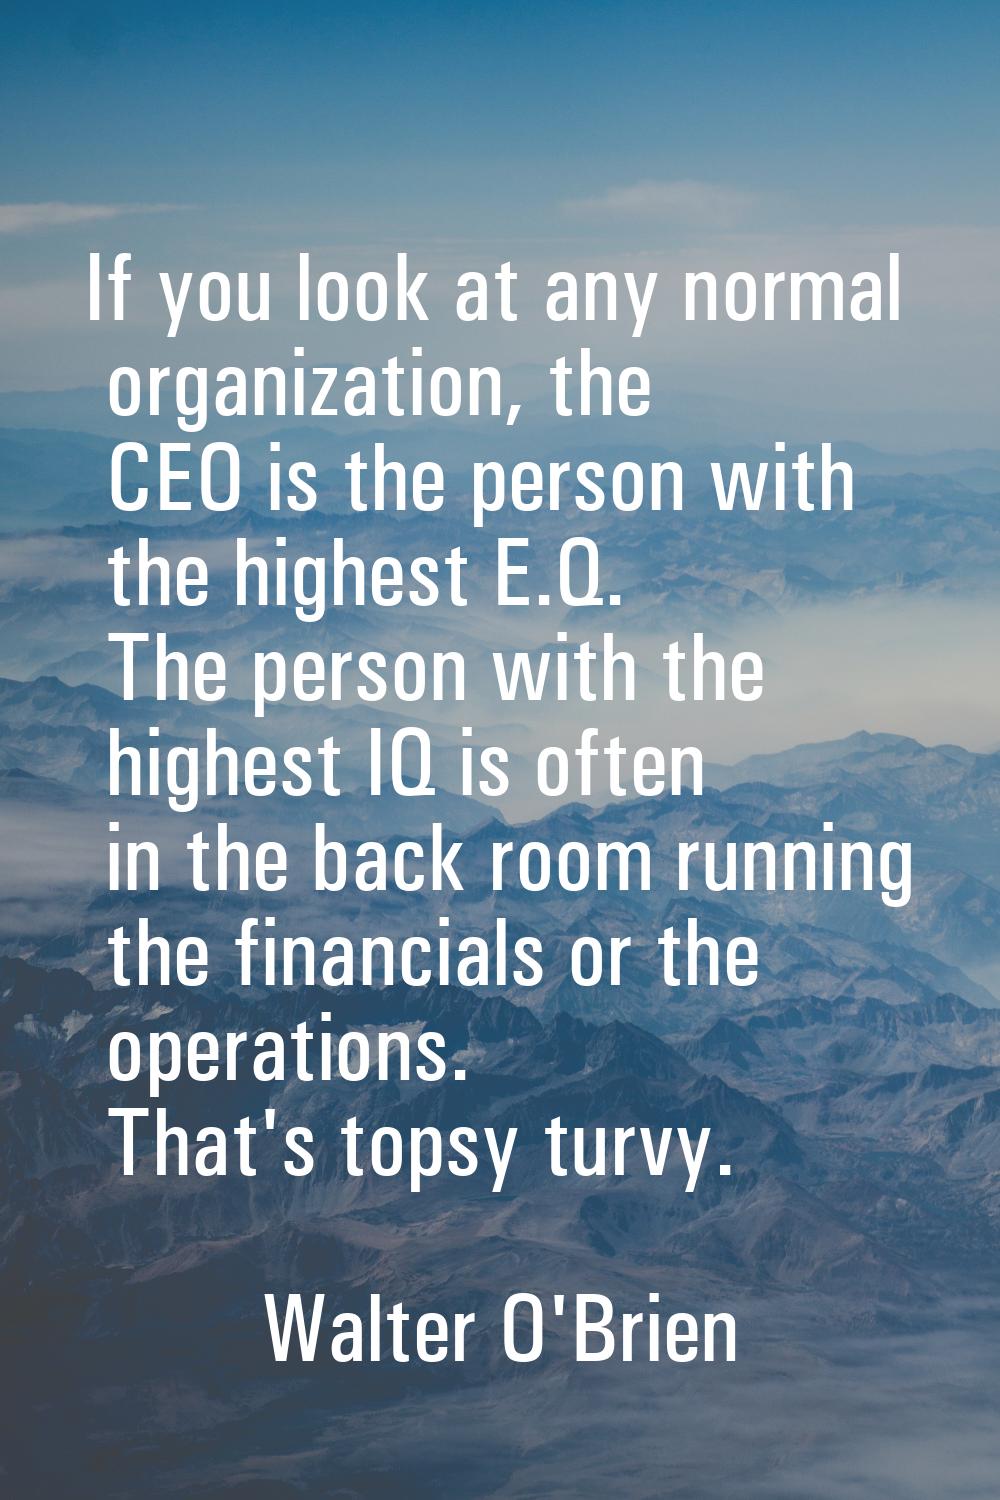 If you look at any normal organization, the CEO is the person with the highest E.Q. The person with